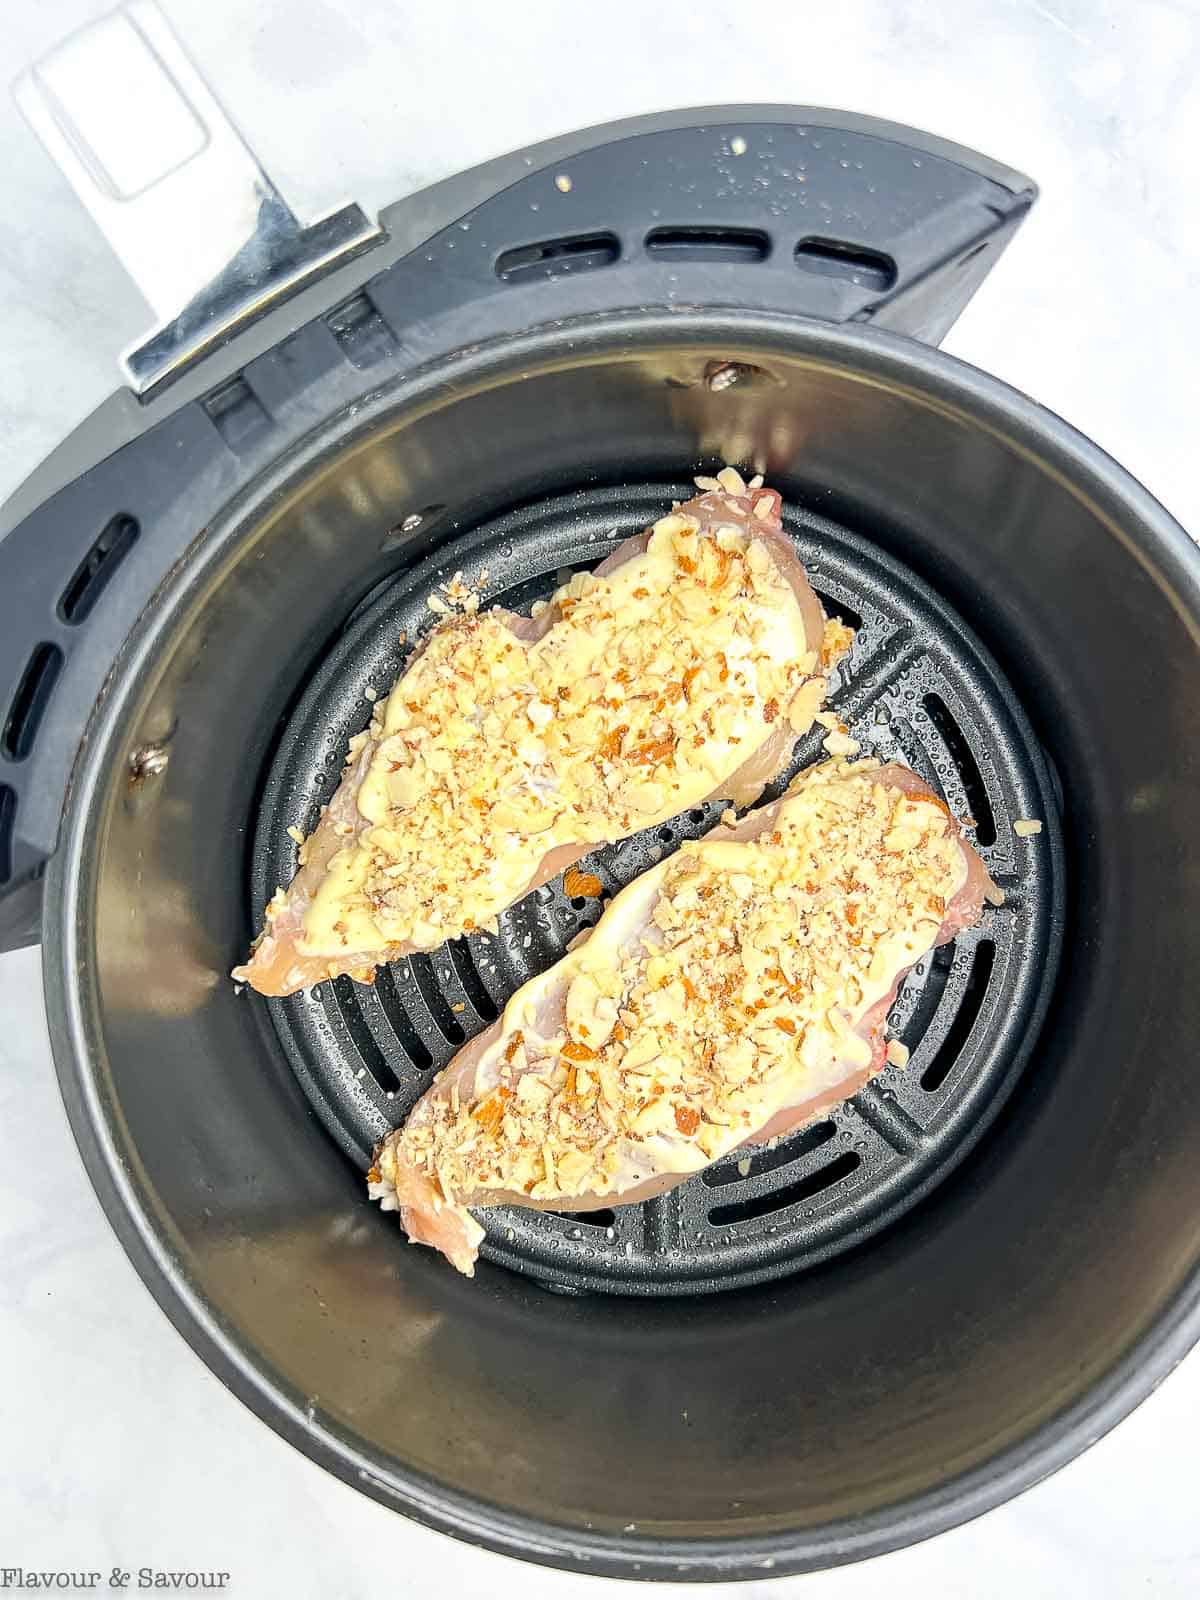 Almond-crusted chicken breasts in an air fryer basket.